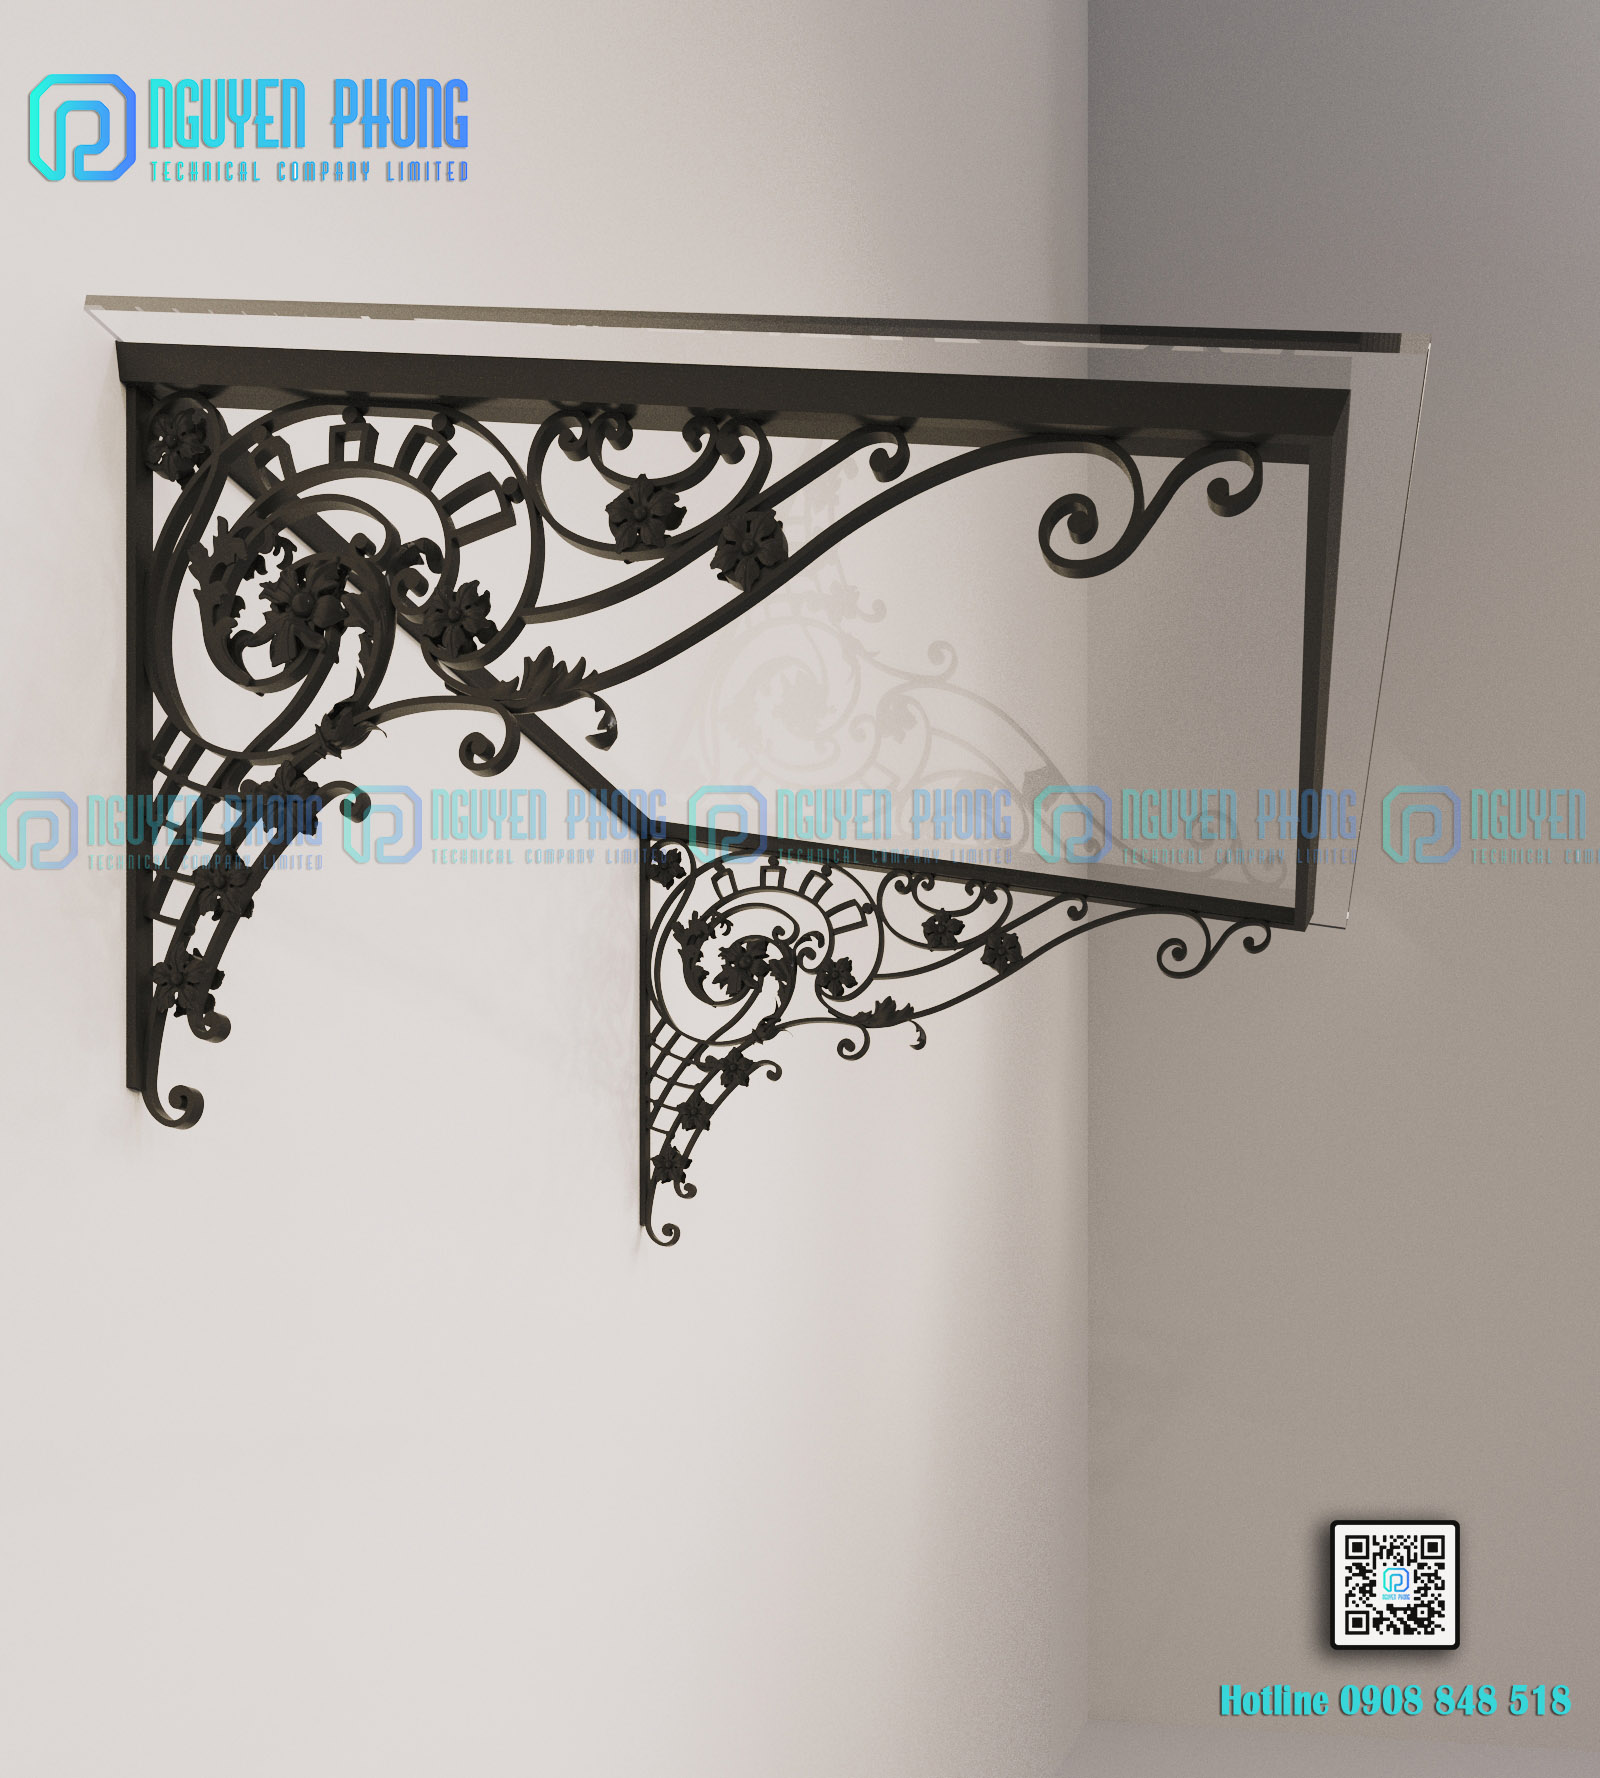 steel-canopy-wrought-iron-glass-canopy-wrought-iron-canopy-2.jpg